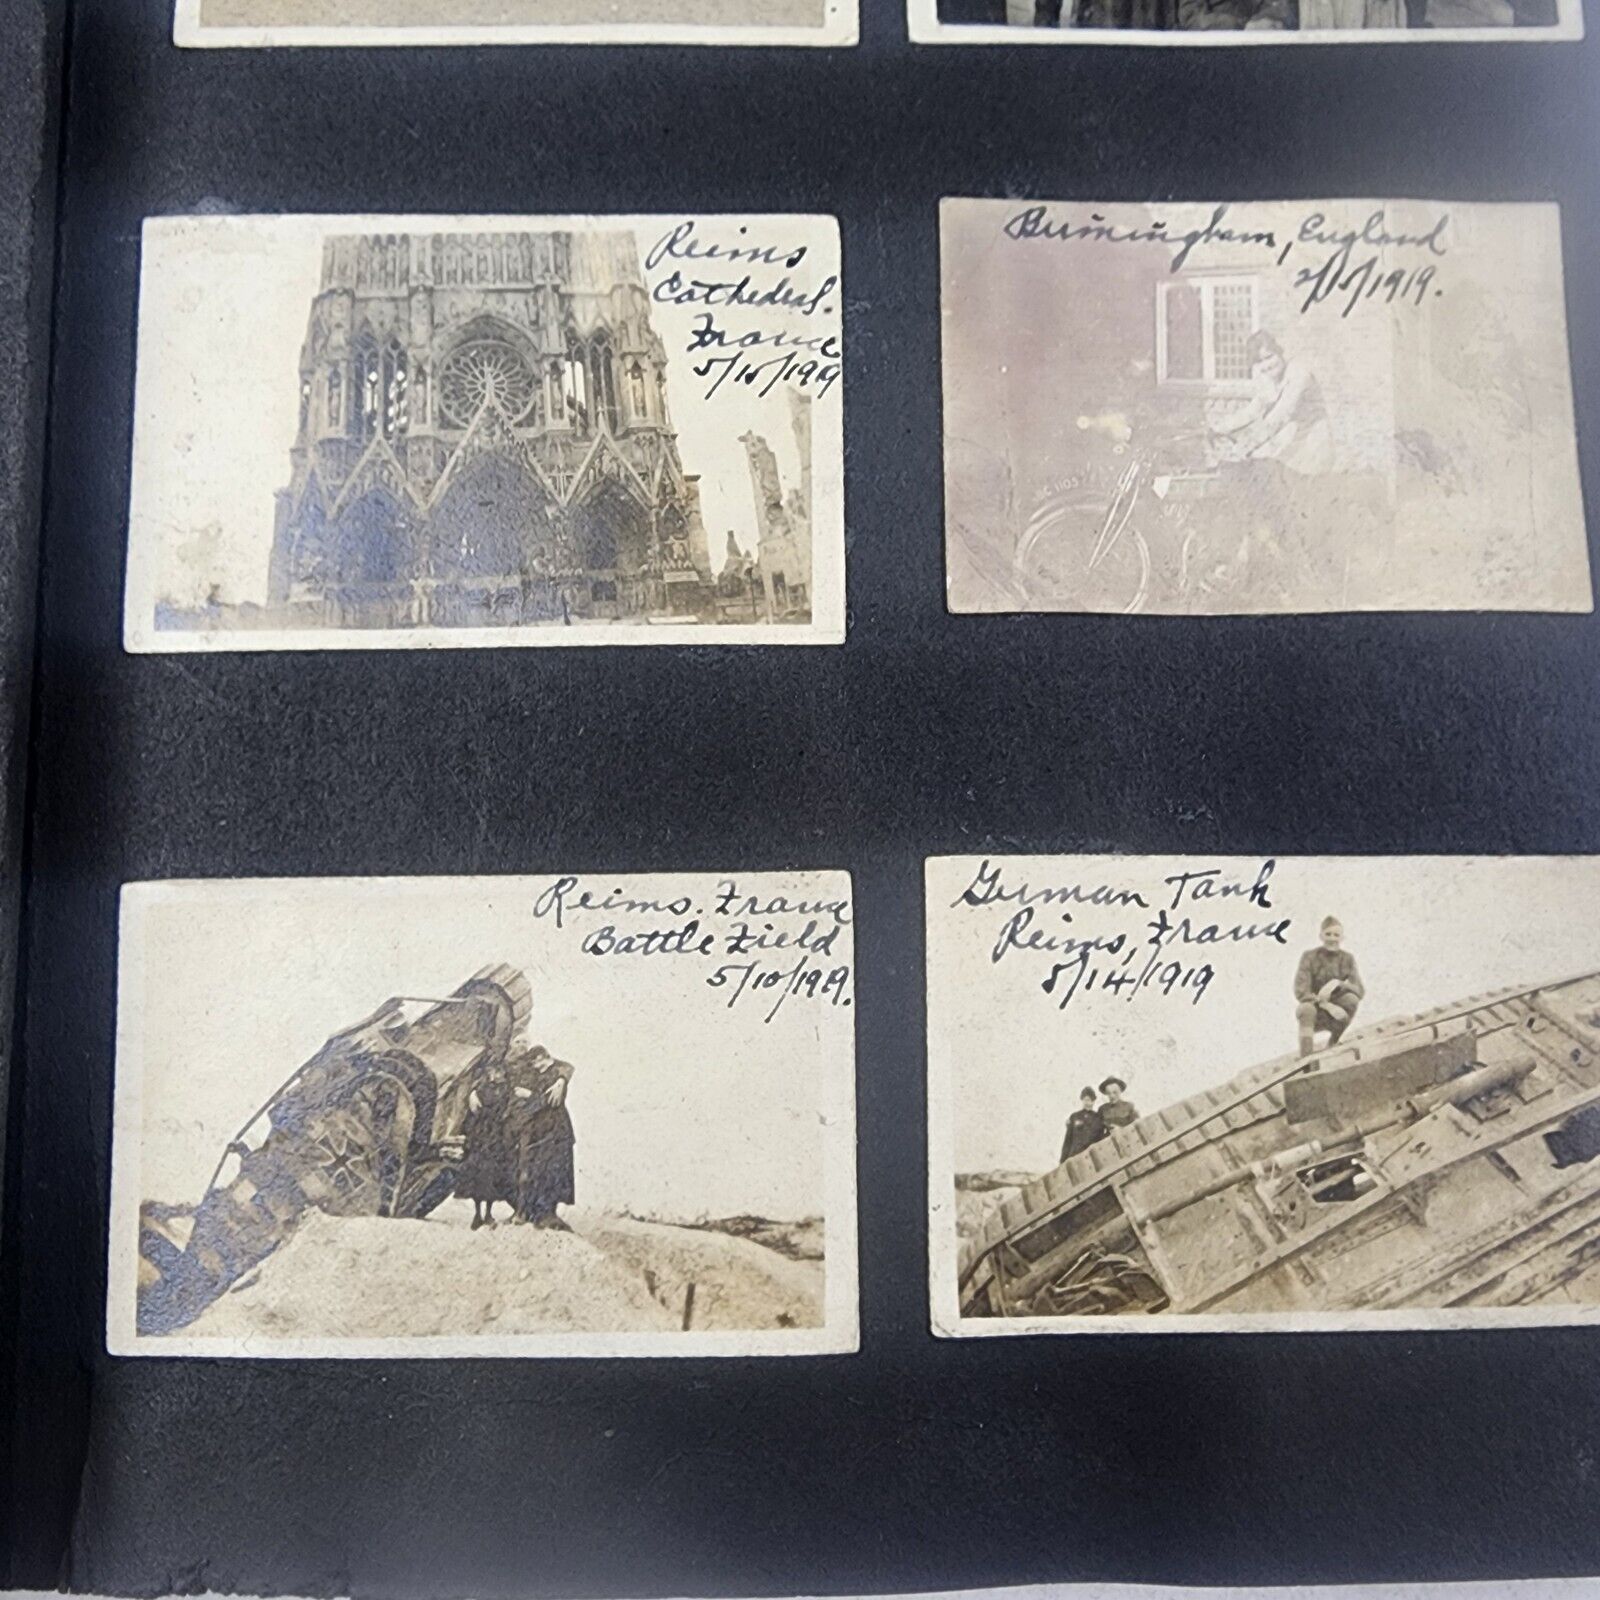  WW1 & Post, Personal Photo Album US Soldier France, Tanks, Cannons, 75 photos